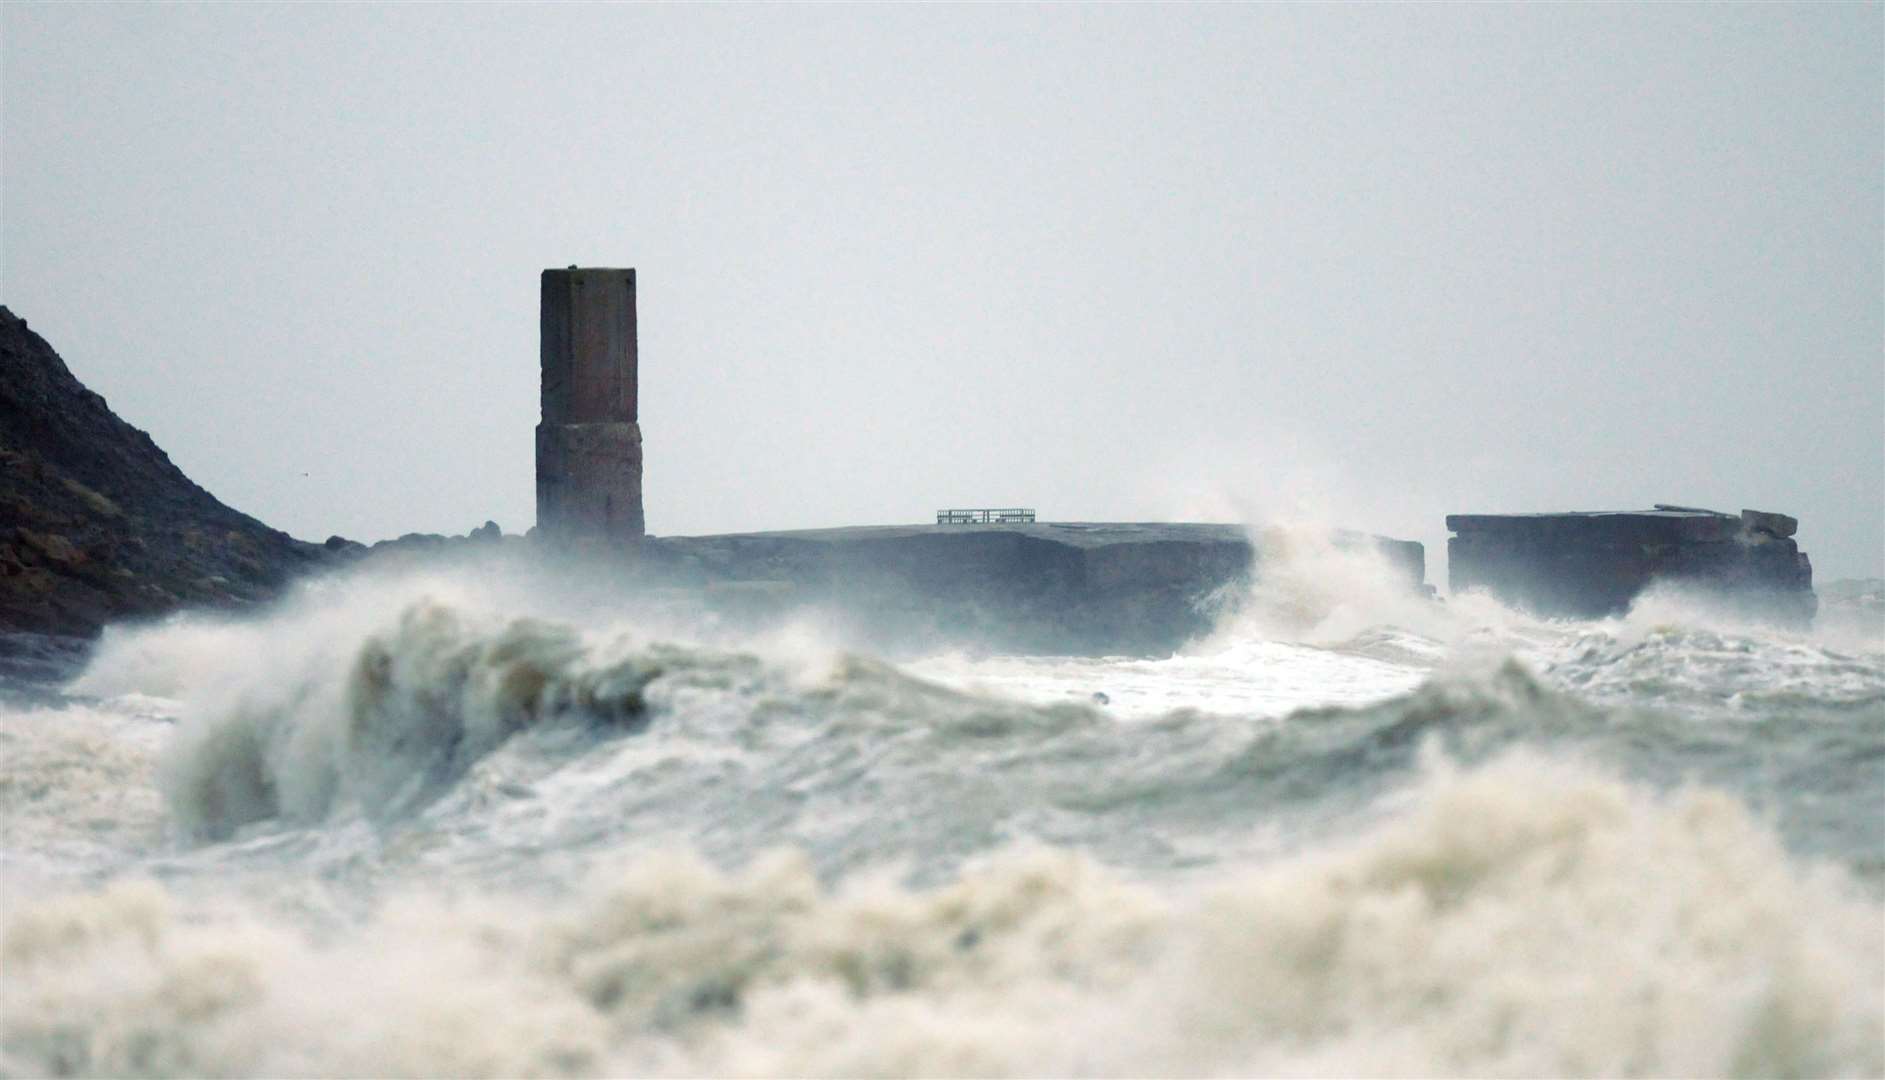 Large waves are expected to hit the Kent coastline this week. Picture: Ruth Cuerden